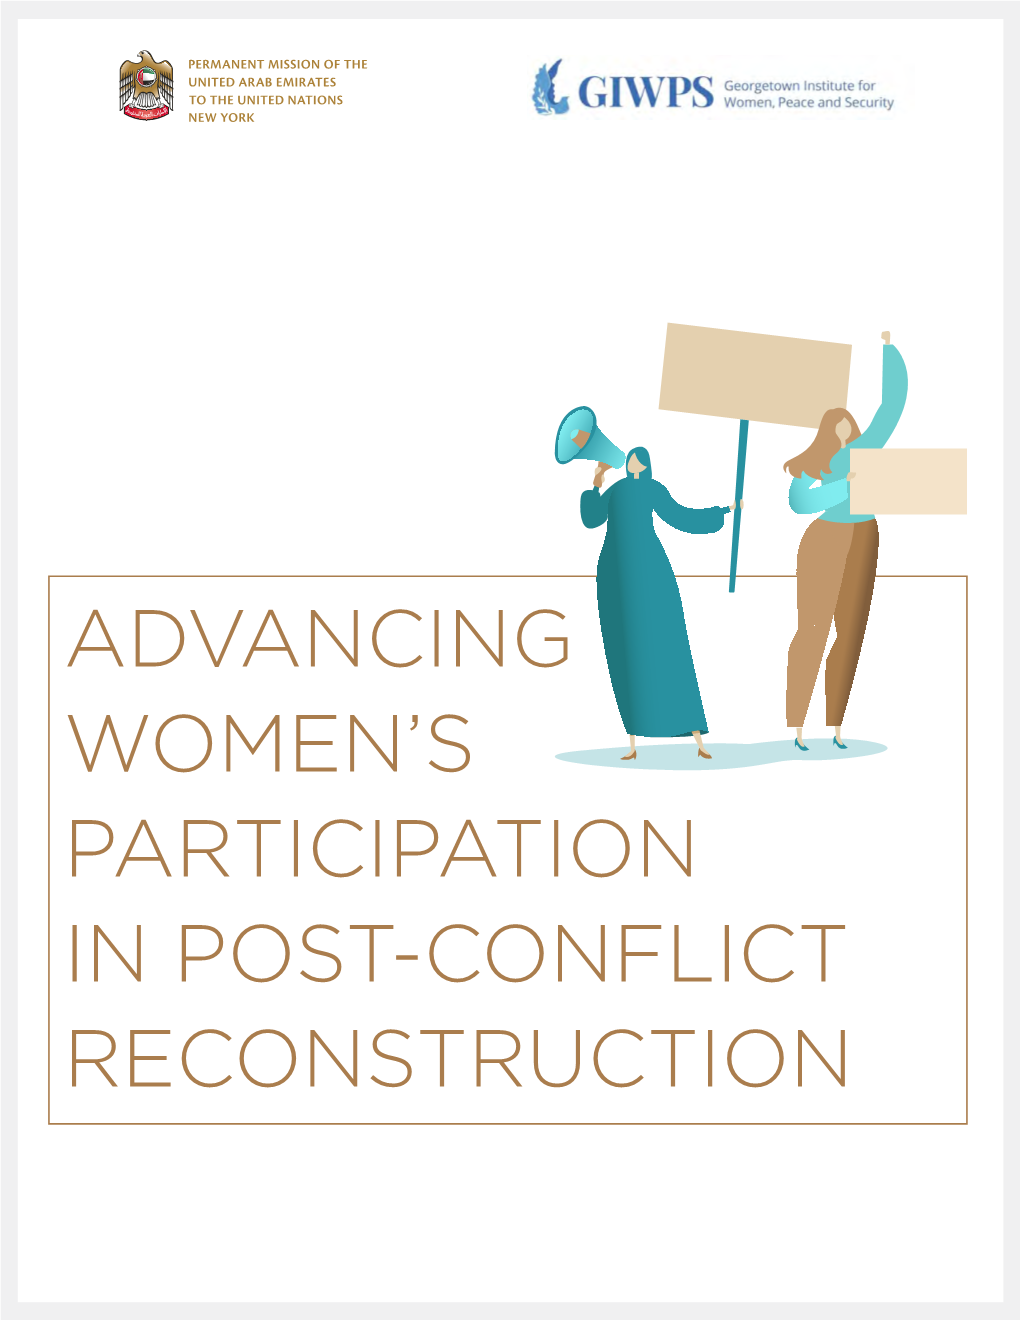 GIWPS: Advancing Women's Participation in Post-Conflict